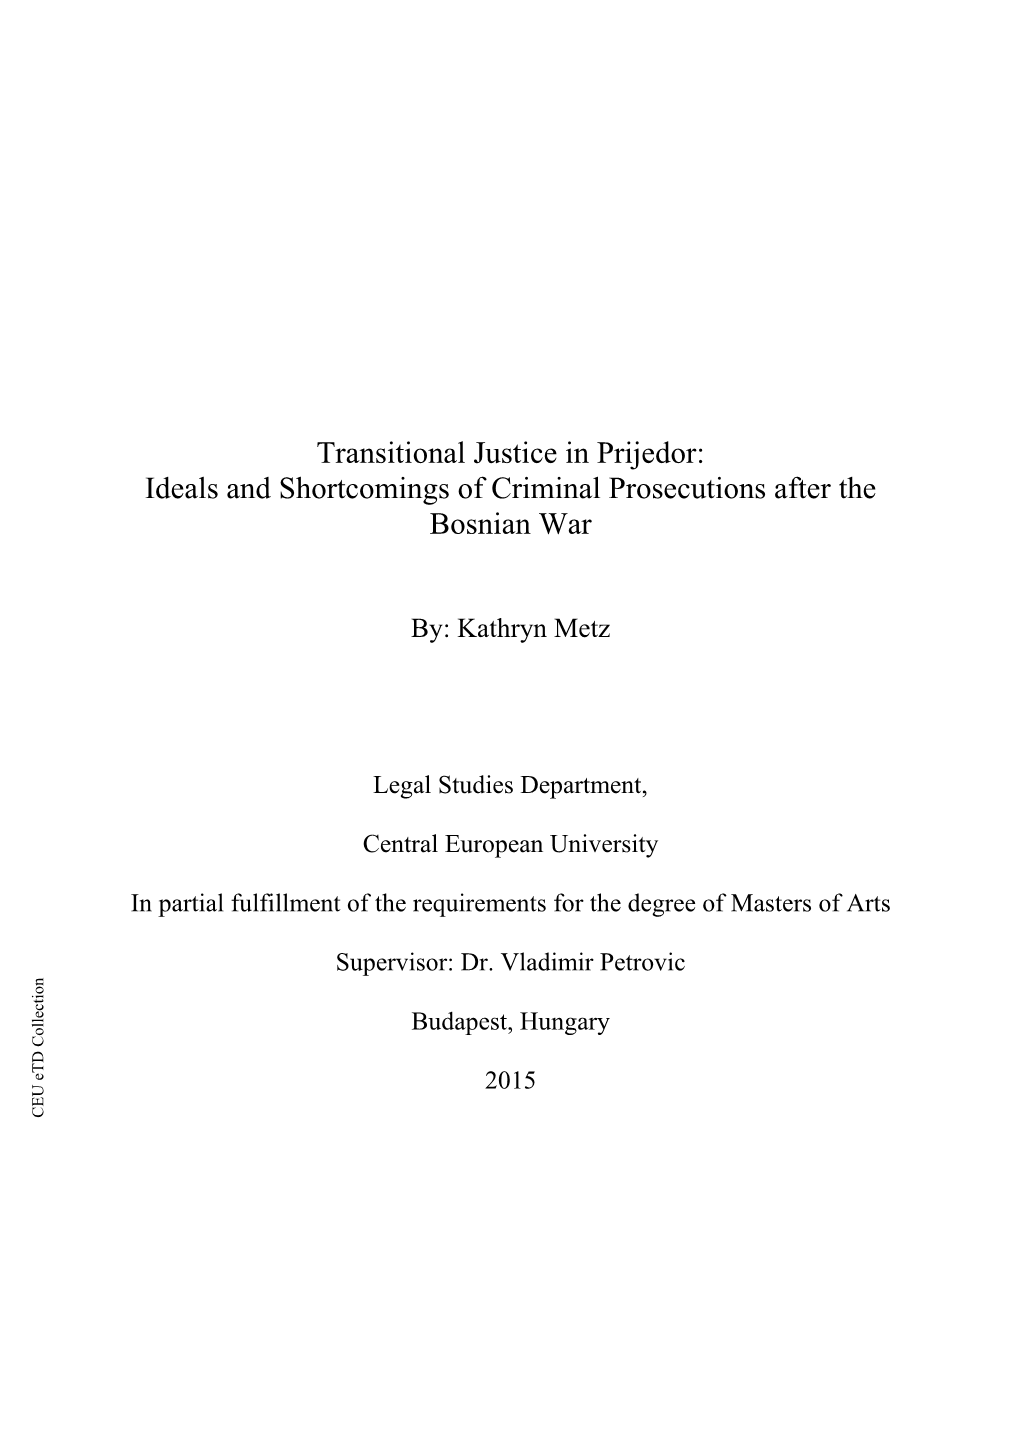 Transitional Justice in Prijedor: Ideals and Shortcomings of Criminal Prosecutions After the Bosnian War